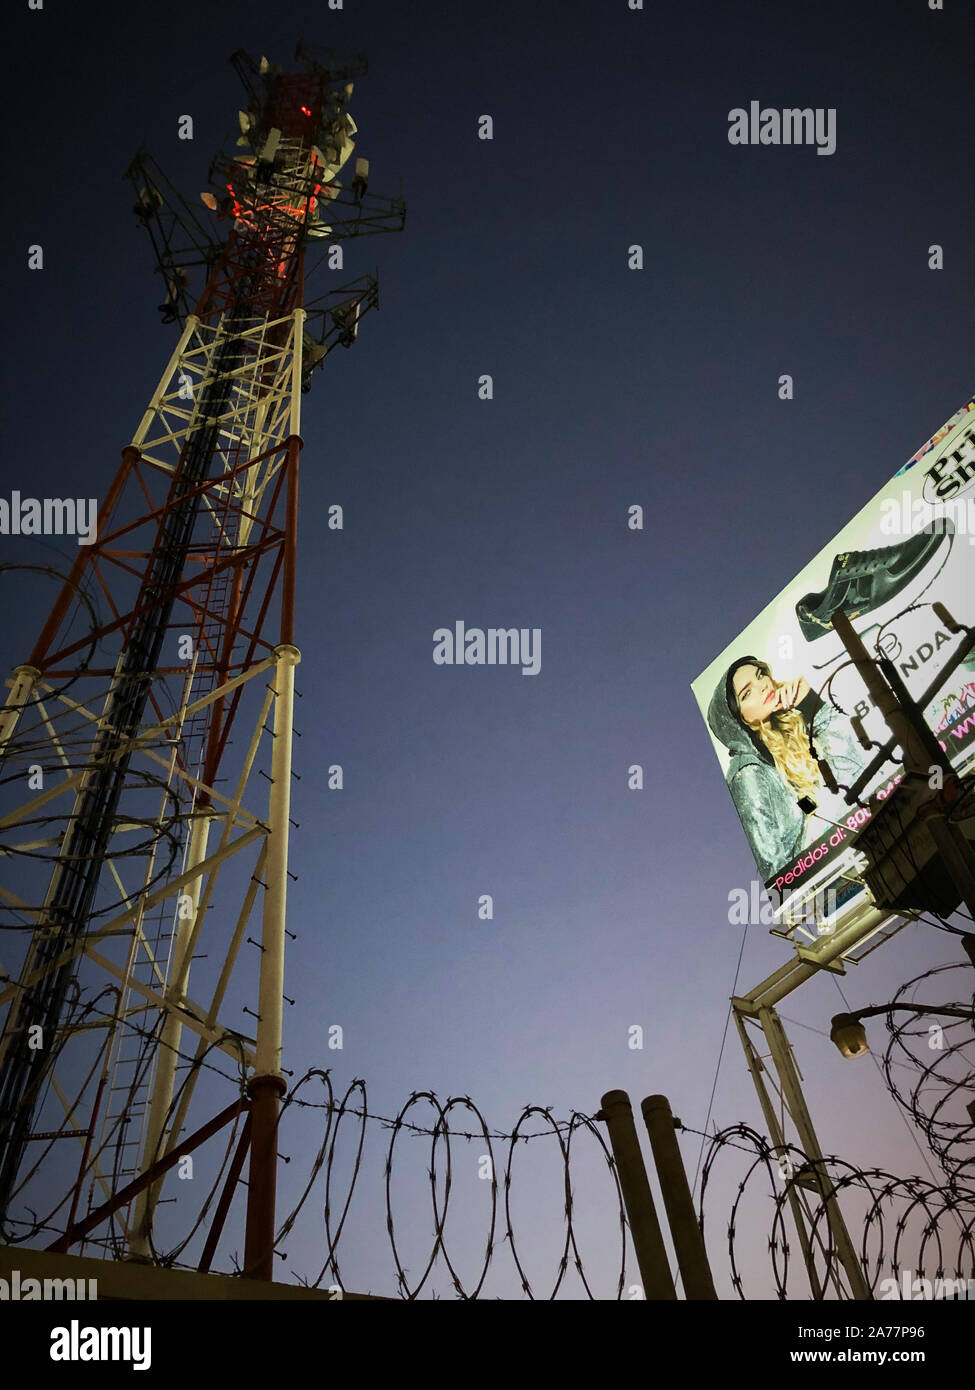 A radio control tower, twisted barb wire fence and a billboard shoe advertisement in Leon, Guanajuato, Mexico at night time. Stock Photo